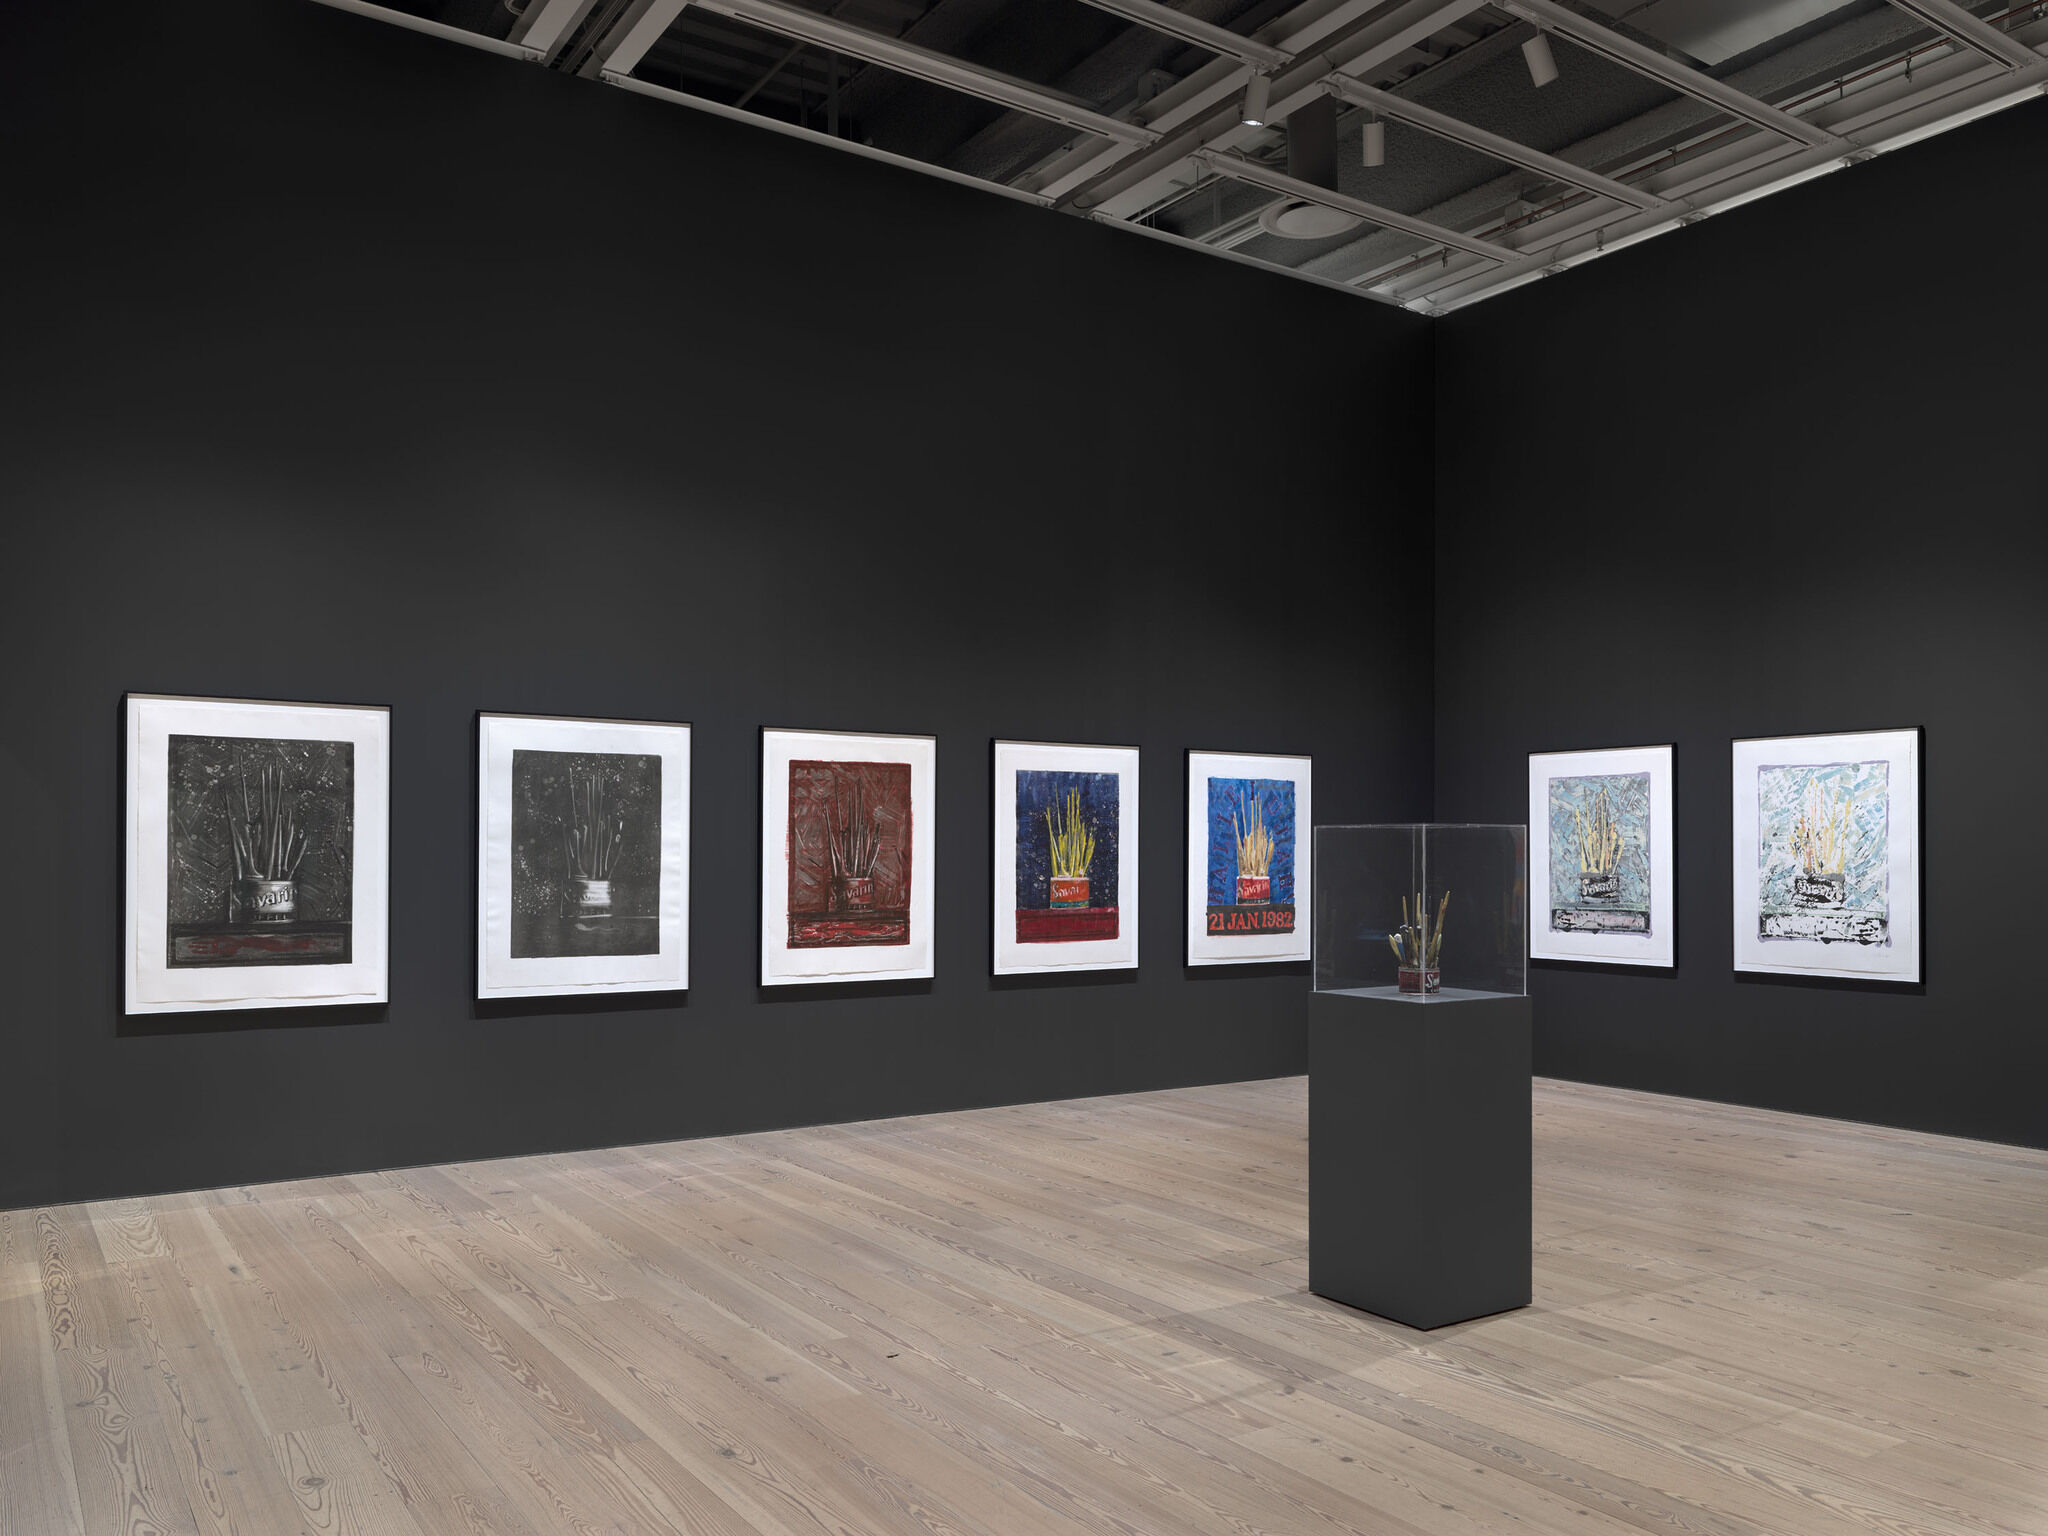 A black exhibition room with seven framed works mounted on the walls and an eighth work encased in glass in the center of the room.